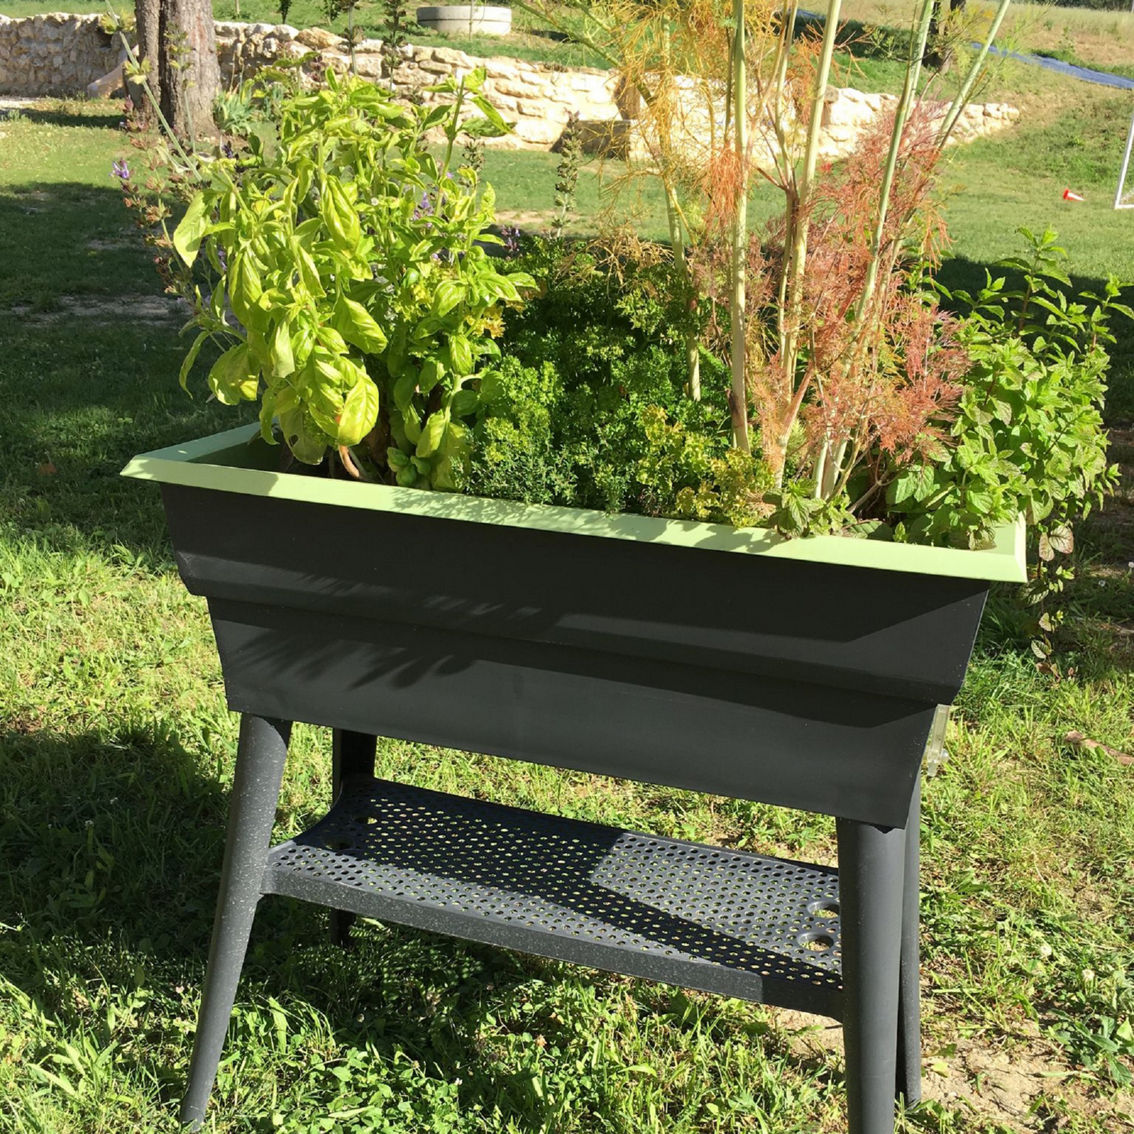 Bosmere Maxi 32 x 15 x 31.5 in. Self-Watering Plastic Raised Garden Bed - Image 3 of 8